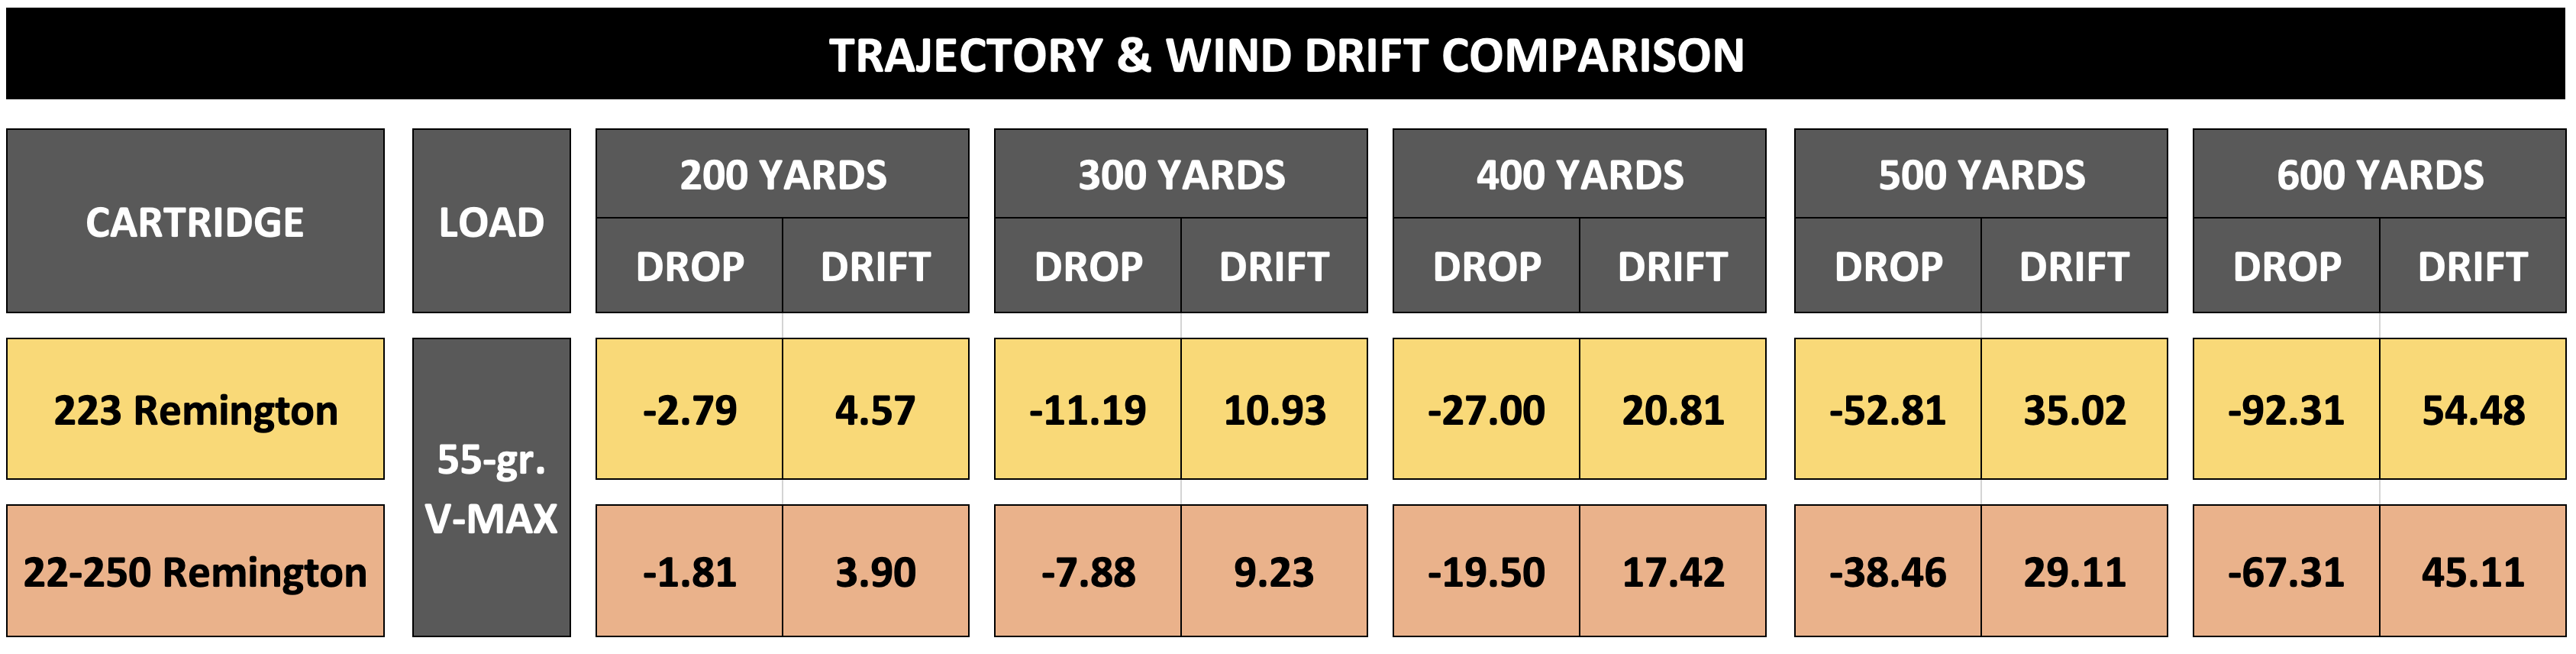 Chart showing trajectory and wind drift comparison between the 22-250 and 223